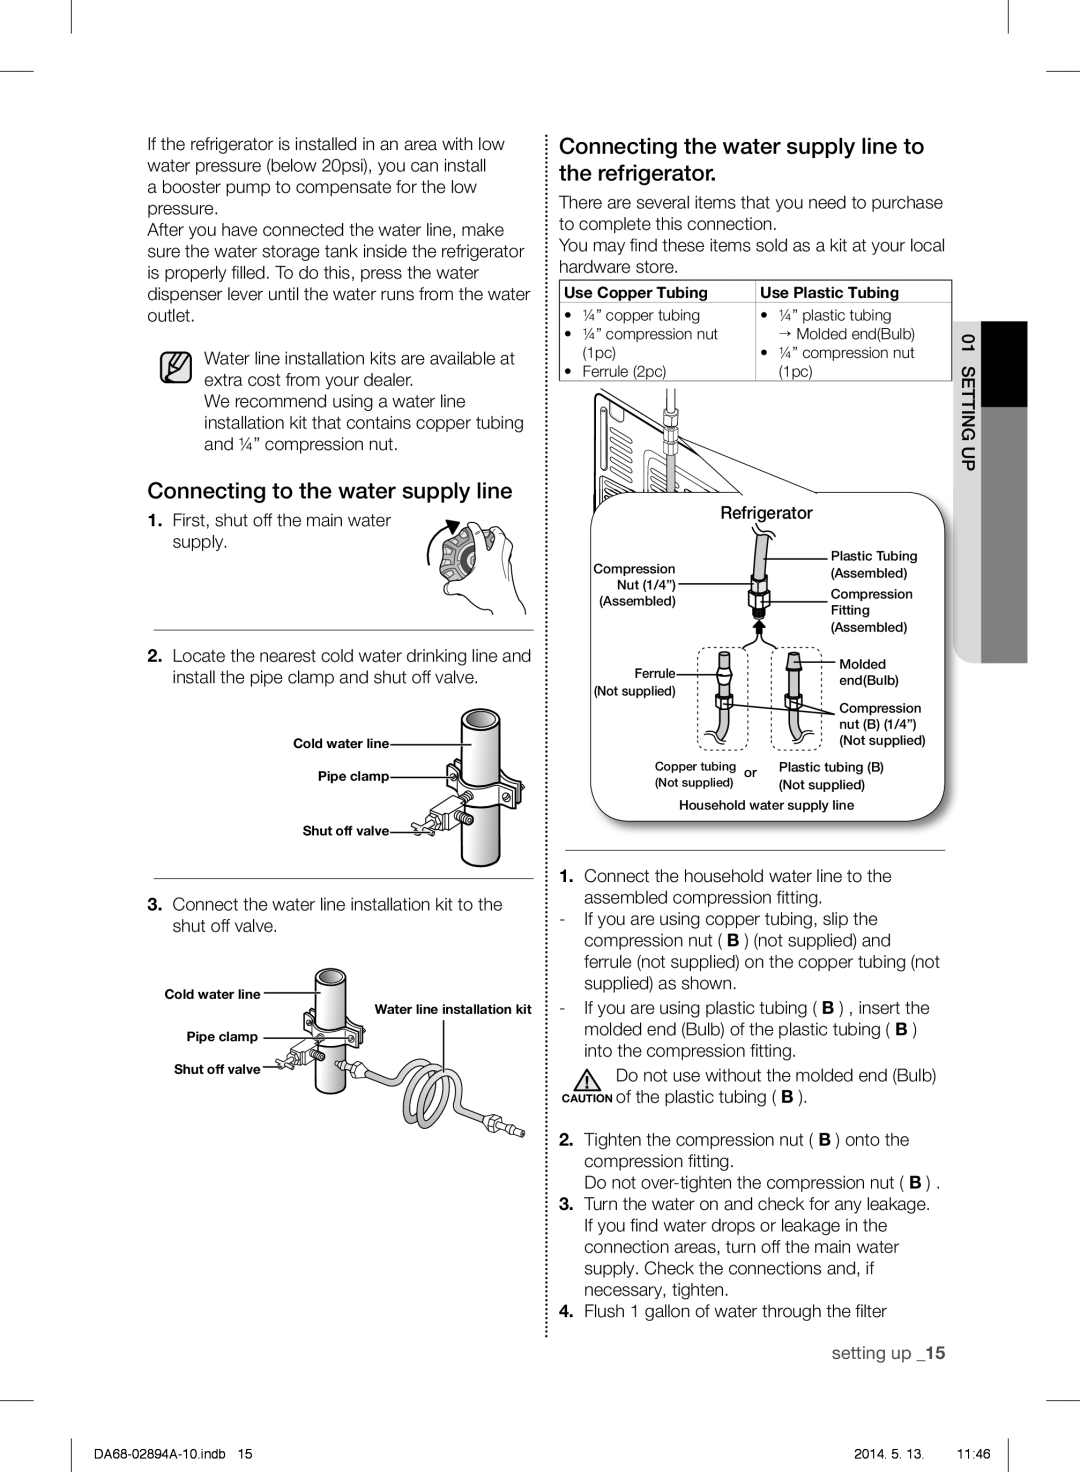 Samsung RF31FMESBSR user manual Connecting to the water supply line, setting up _15 